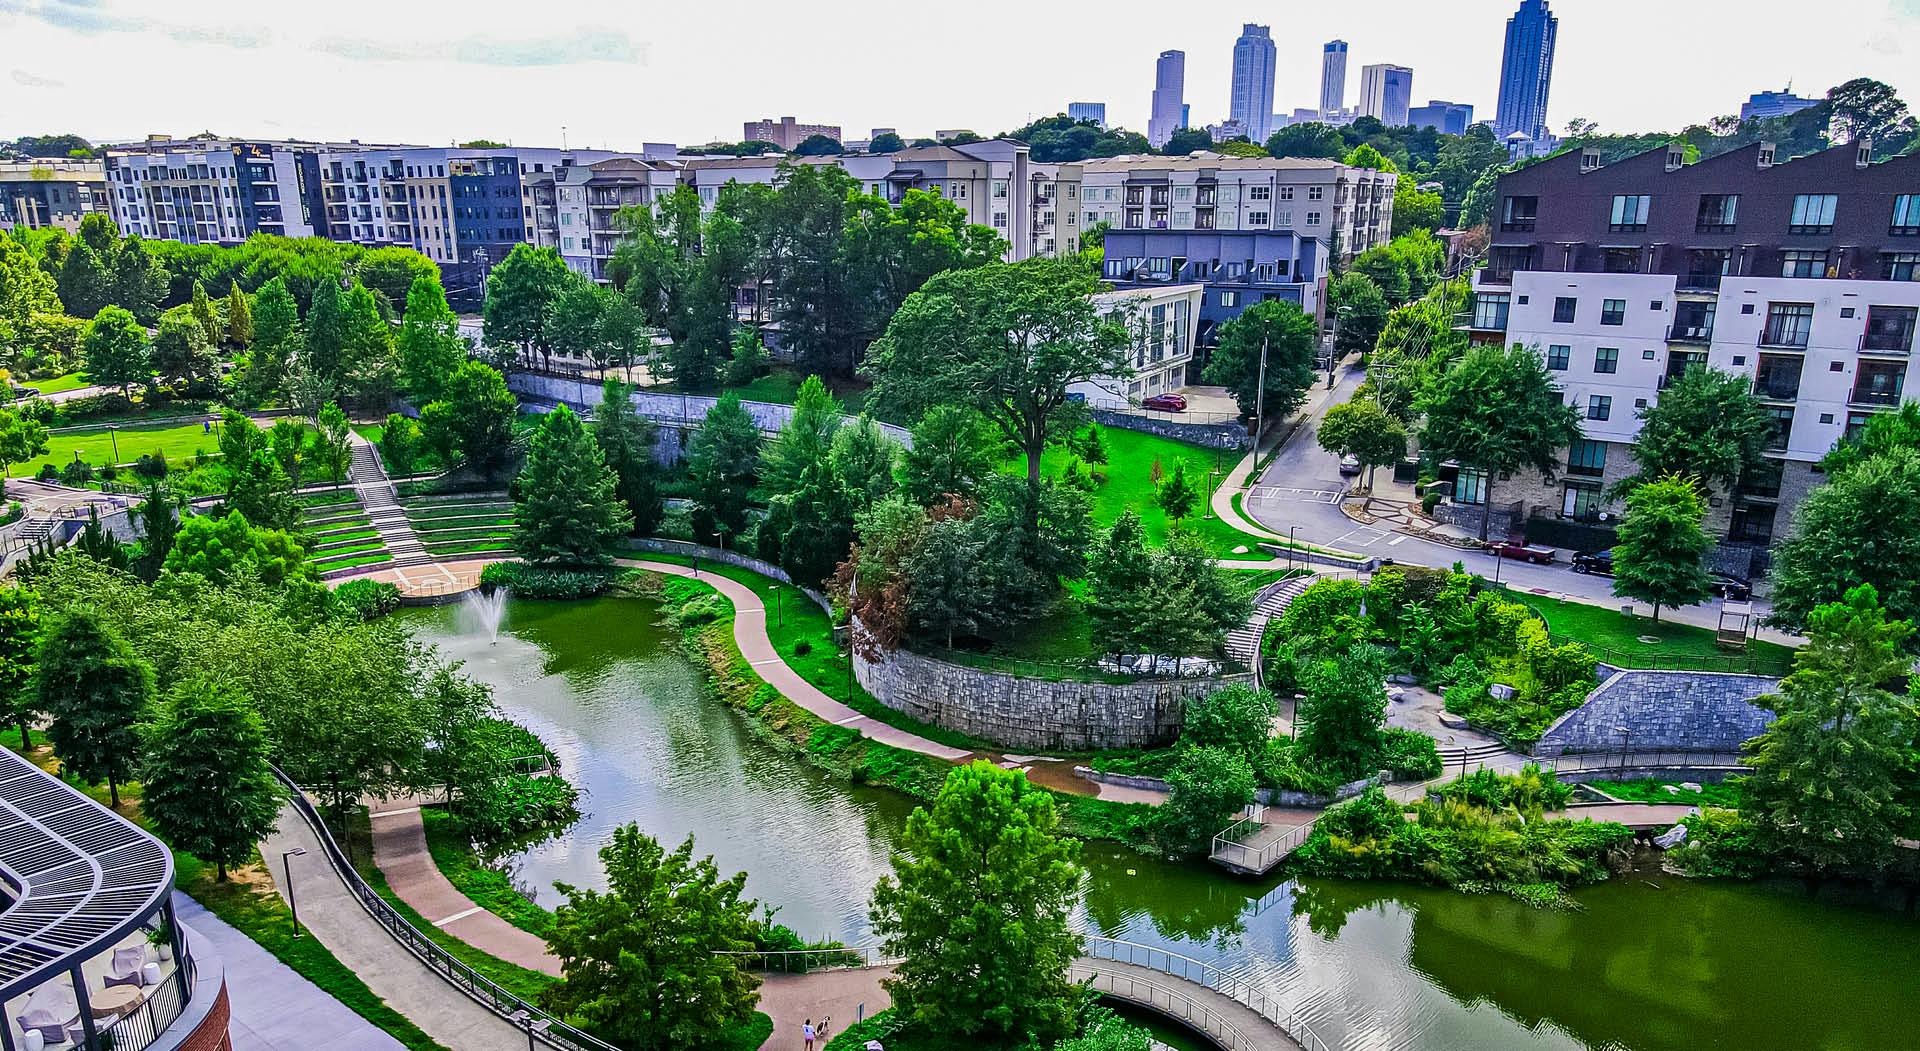 An aerial view of the lake in Historic Fourth Ward Park with the downtown Atlanta skyline in the background. (Photo Credit: LoKnows Drones)